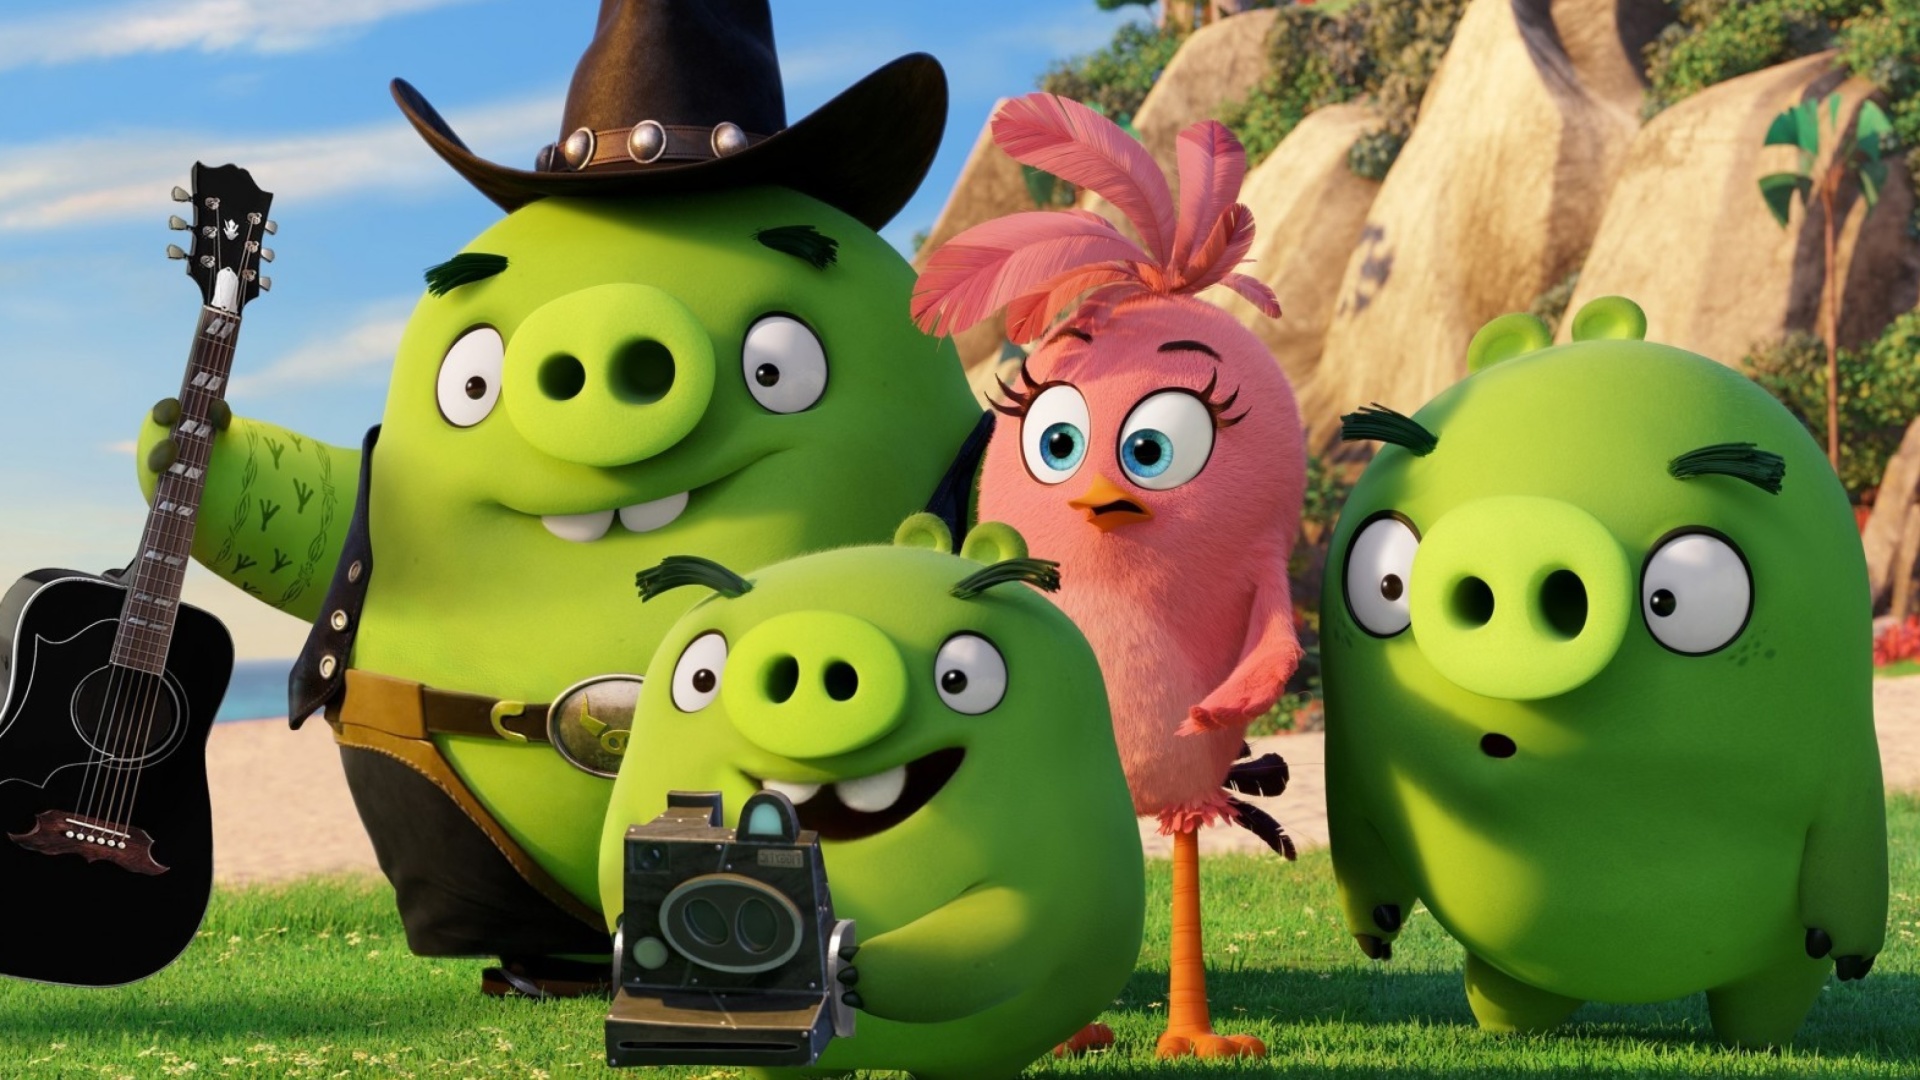 The Angry Birds Movie Pigs screenshot #1 1920x1080